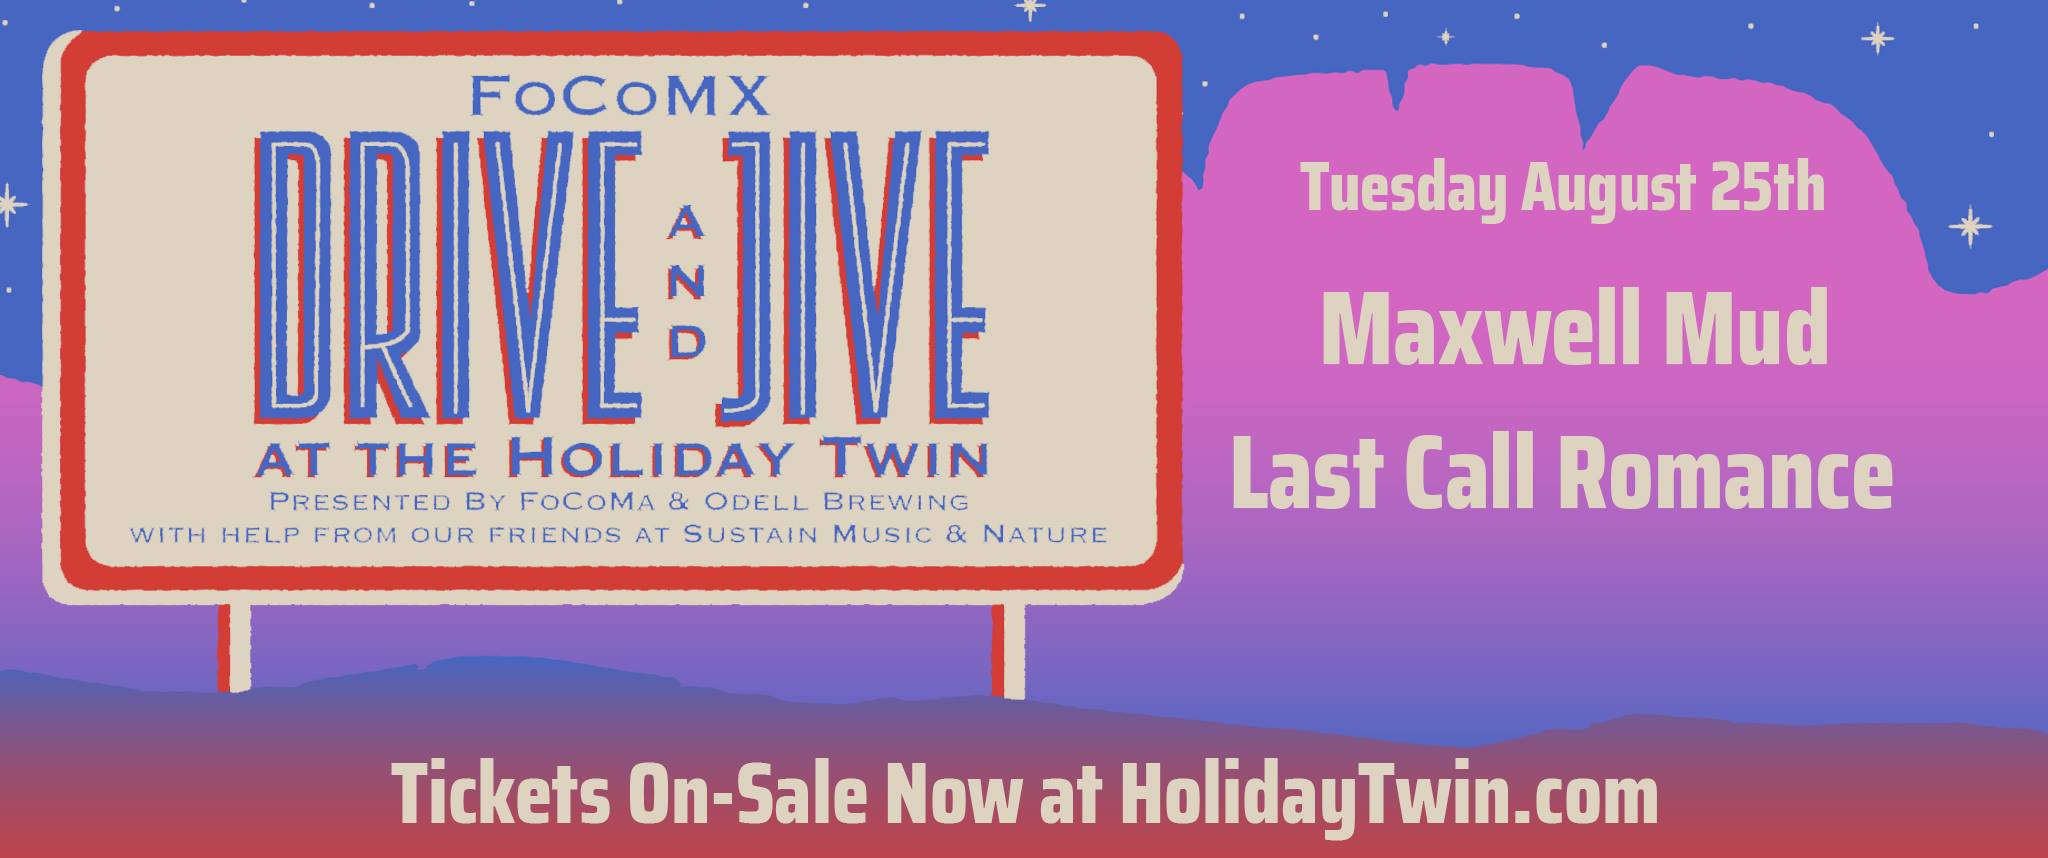 Drive & Jive: at the Holiday_Twin: Fort Collins, CO Aug. 25th, 2020